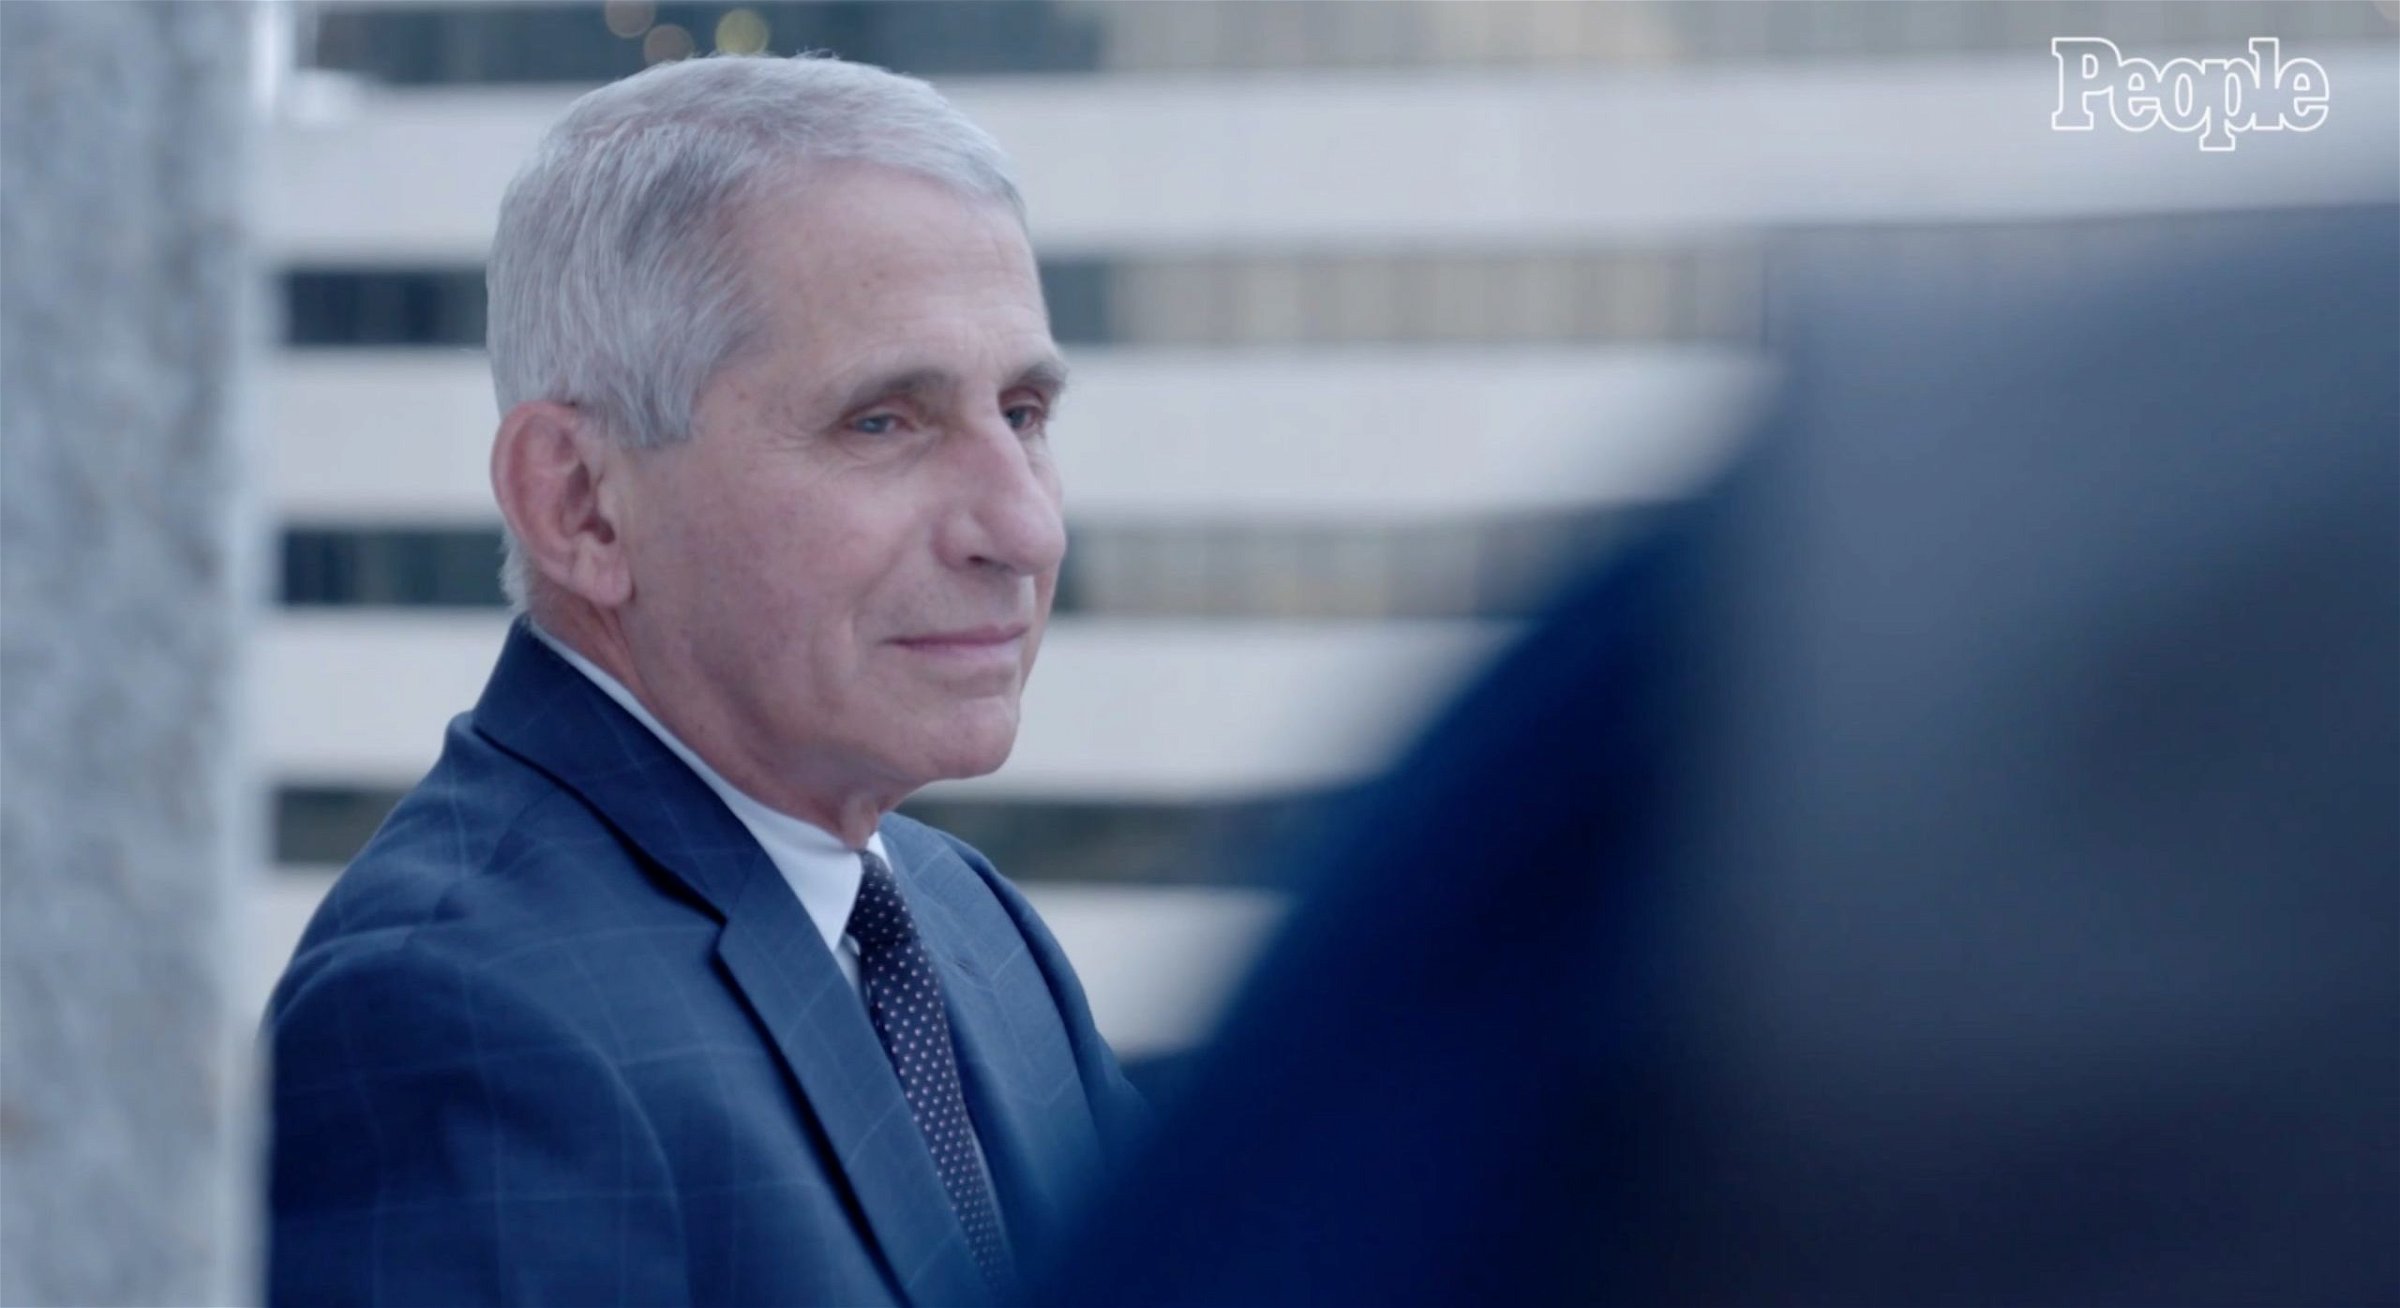 Dr. Anthony Fauci poses for a photo with People magazine after being selected as one of the magazine's "2020 People of the Year." (People magazine/Video screenshot)